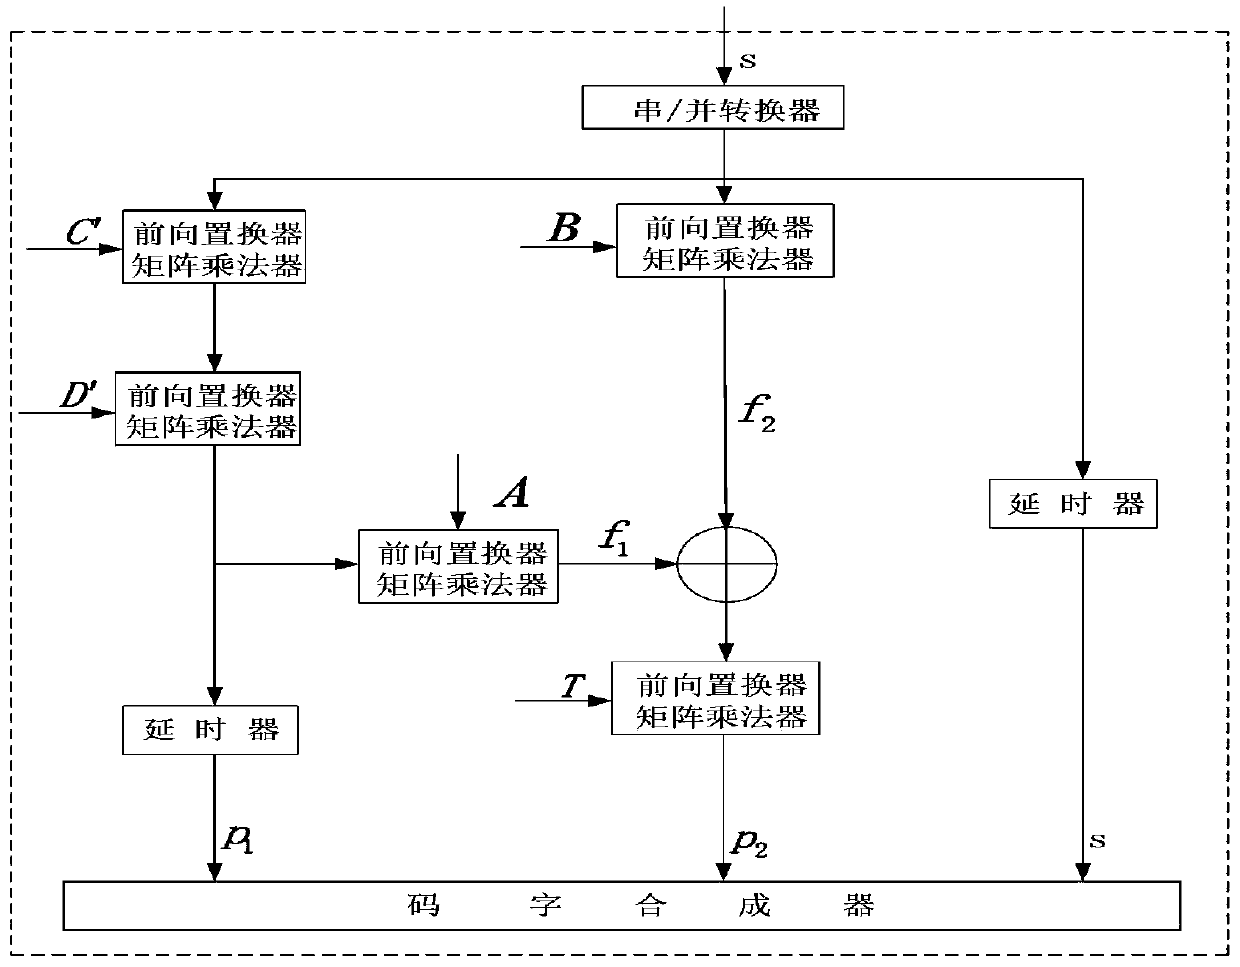 An unmanned aerial vehicle relay control system based on an efficient low-complexity LDPC code